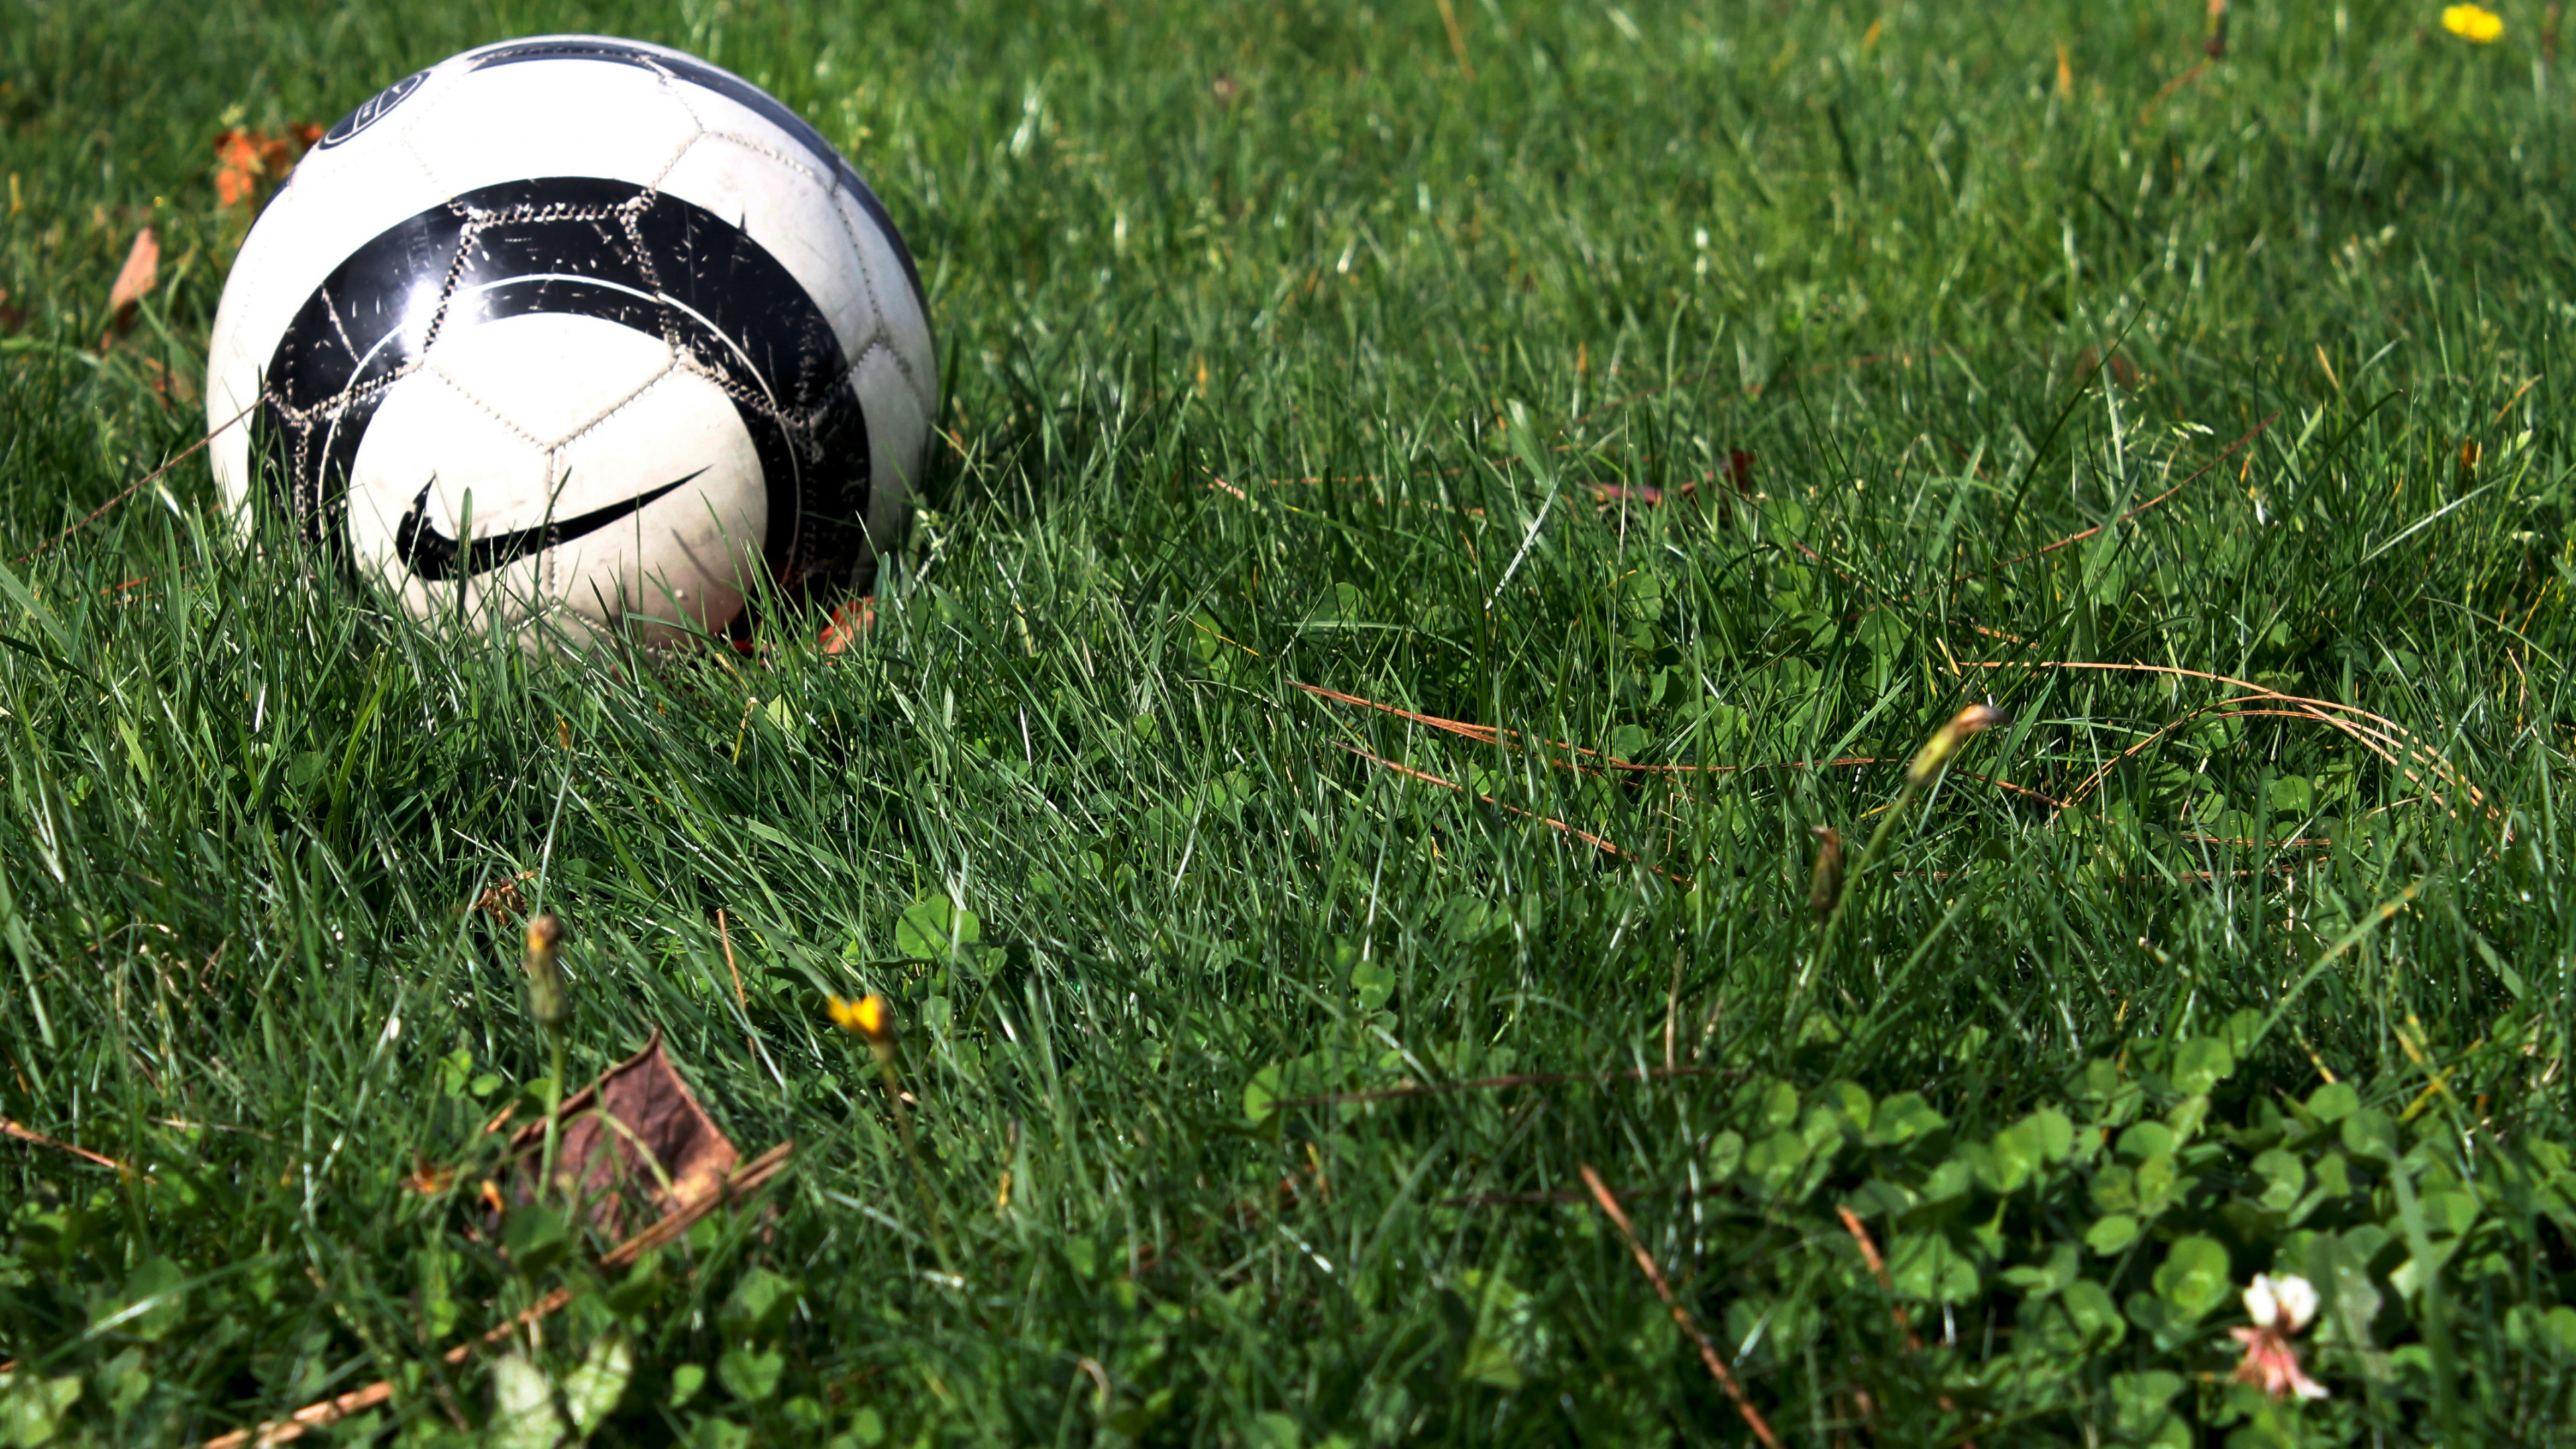 White and Black Soccer Ball on Green Grass Field. Wallpaper in 3840x2160 Resolution